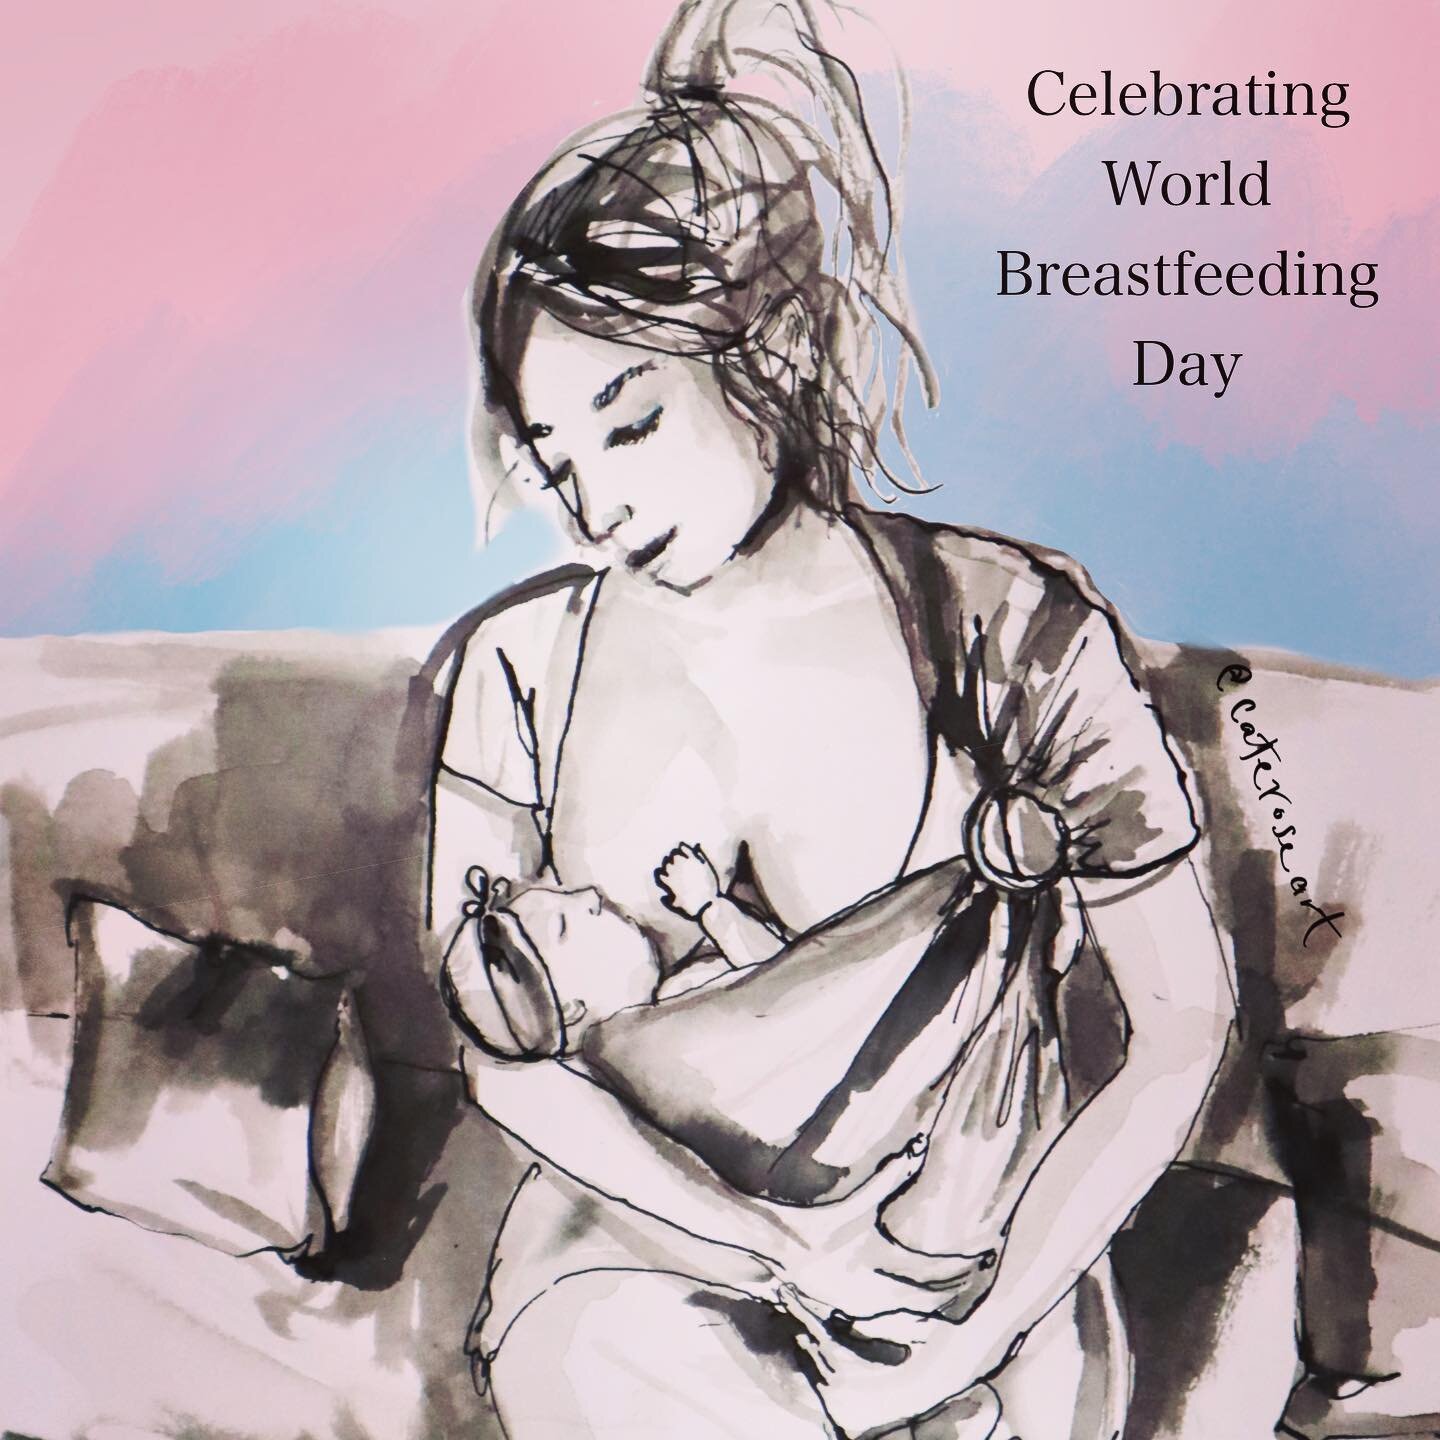 Celebrating World Breastfeeding Week! If you can breastfeed your baby there are so many benefits!  Don&rsquo;t be surprised if you find it&rsquo;s not working smoothly at first- I found out myself it doesn&rsquo;t always come easily in the beginning.